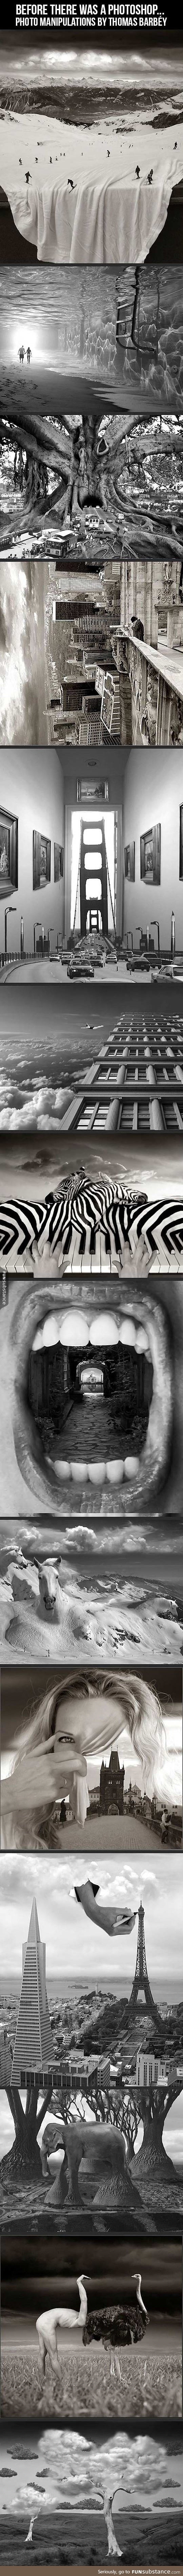 Surreal Photos made before there was a photoshop